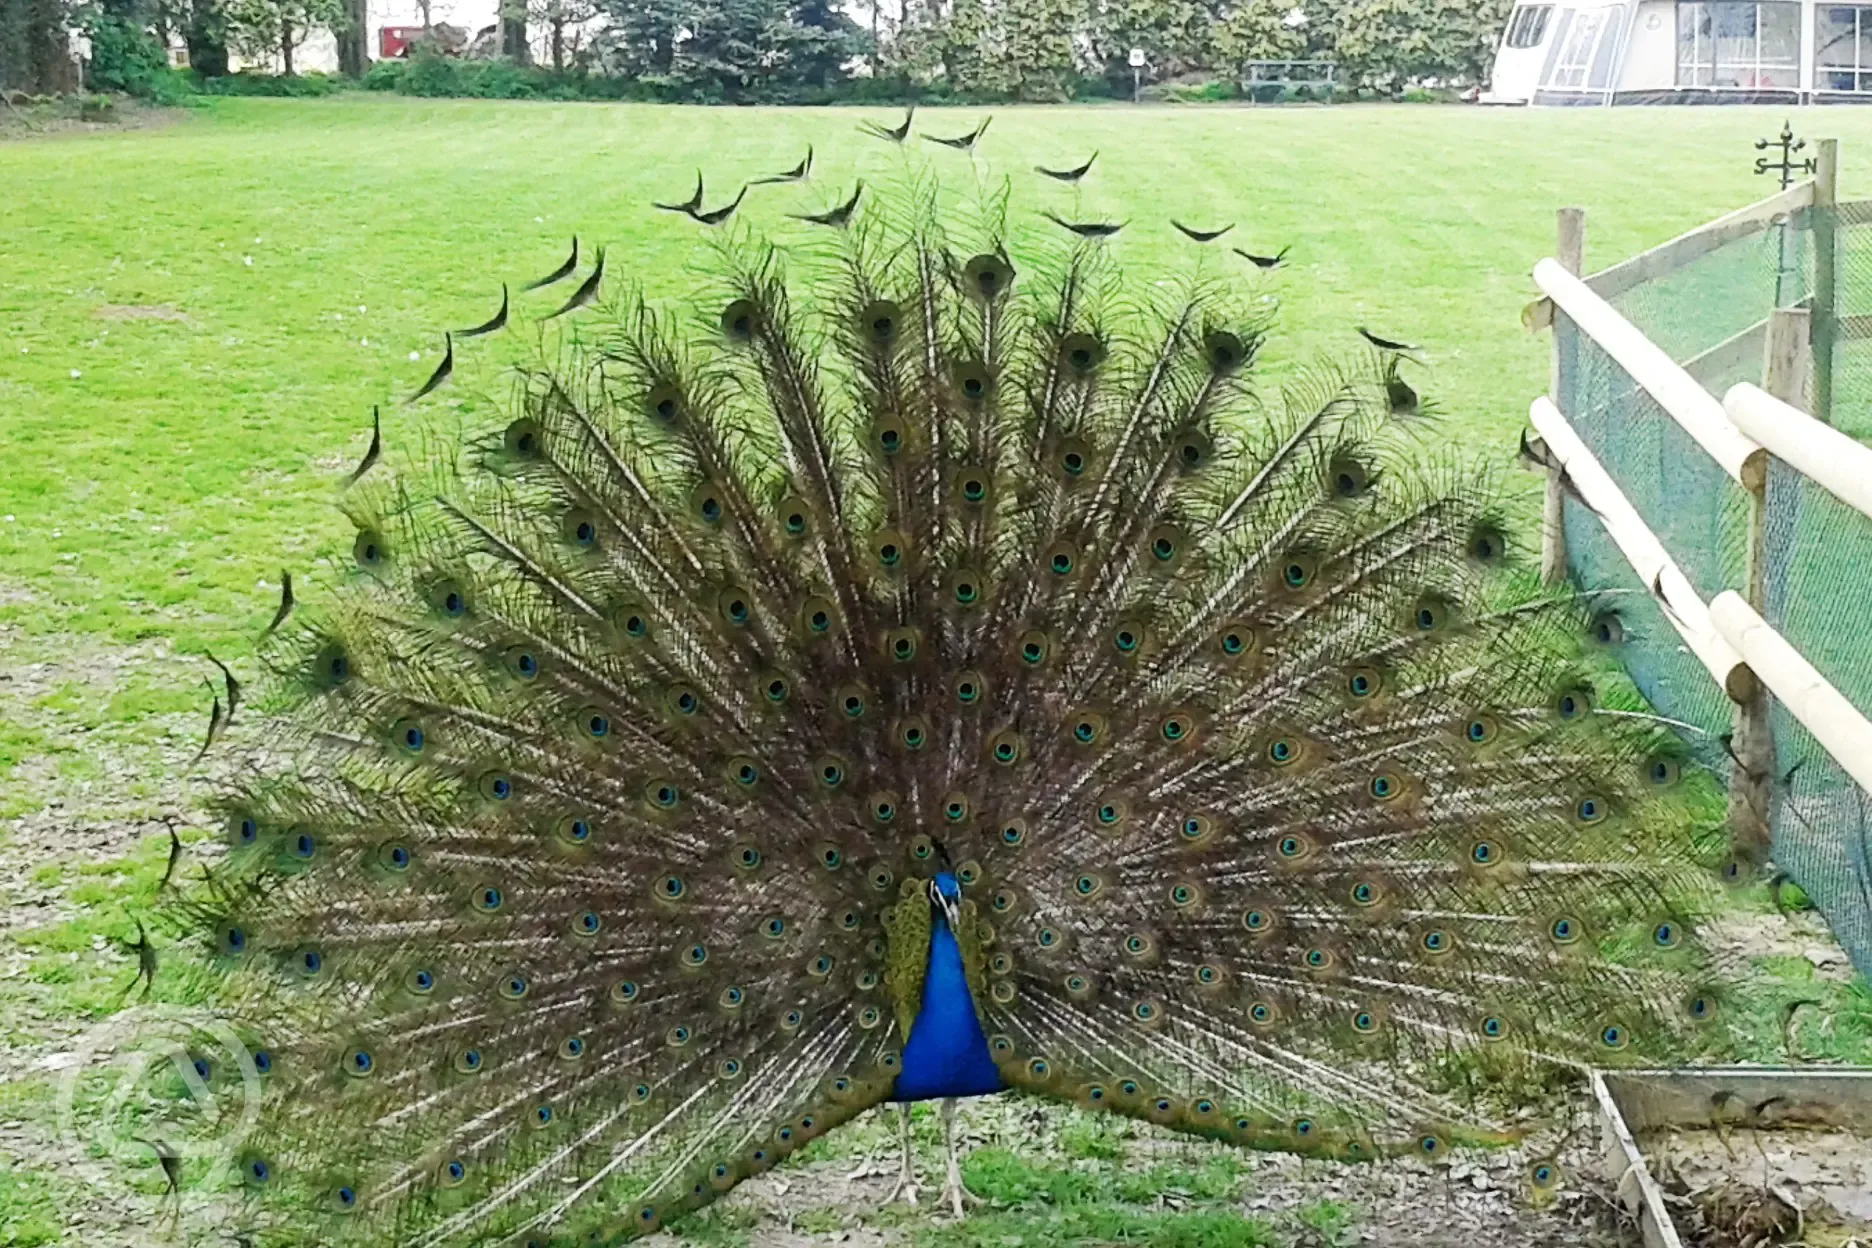 Oliver, our resident peacock